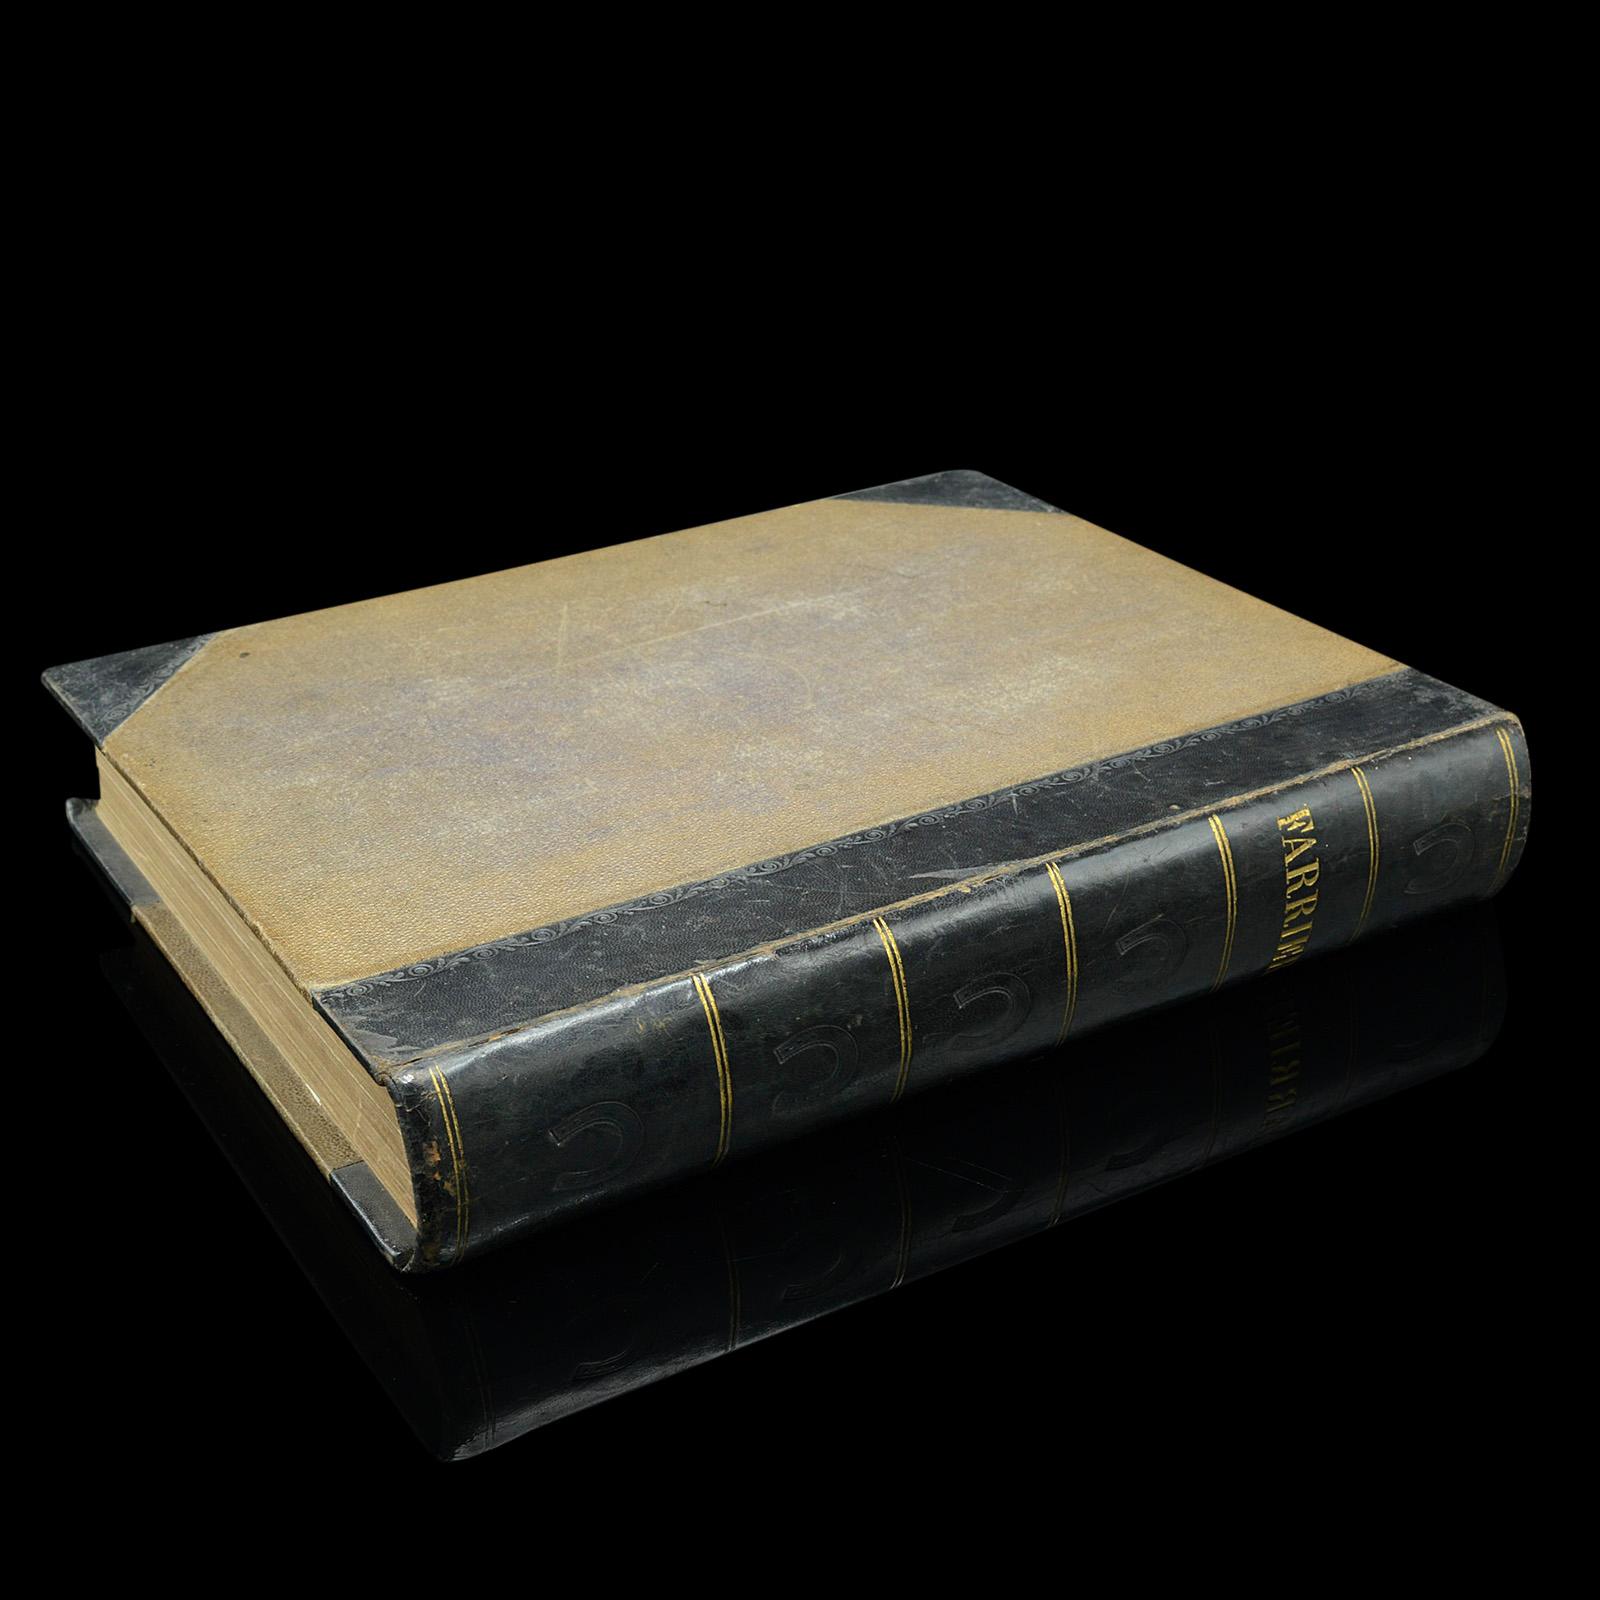 This is an antique copy of Modern Practical Farriery, by W.J. Miles et al. An English language, hard bound non-fiction book, dating to the late Victorian period, circa 1900.

Full title, as follows: Modern practical farriery - a complete guide to